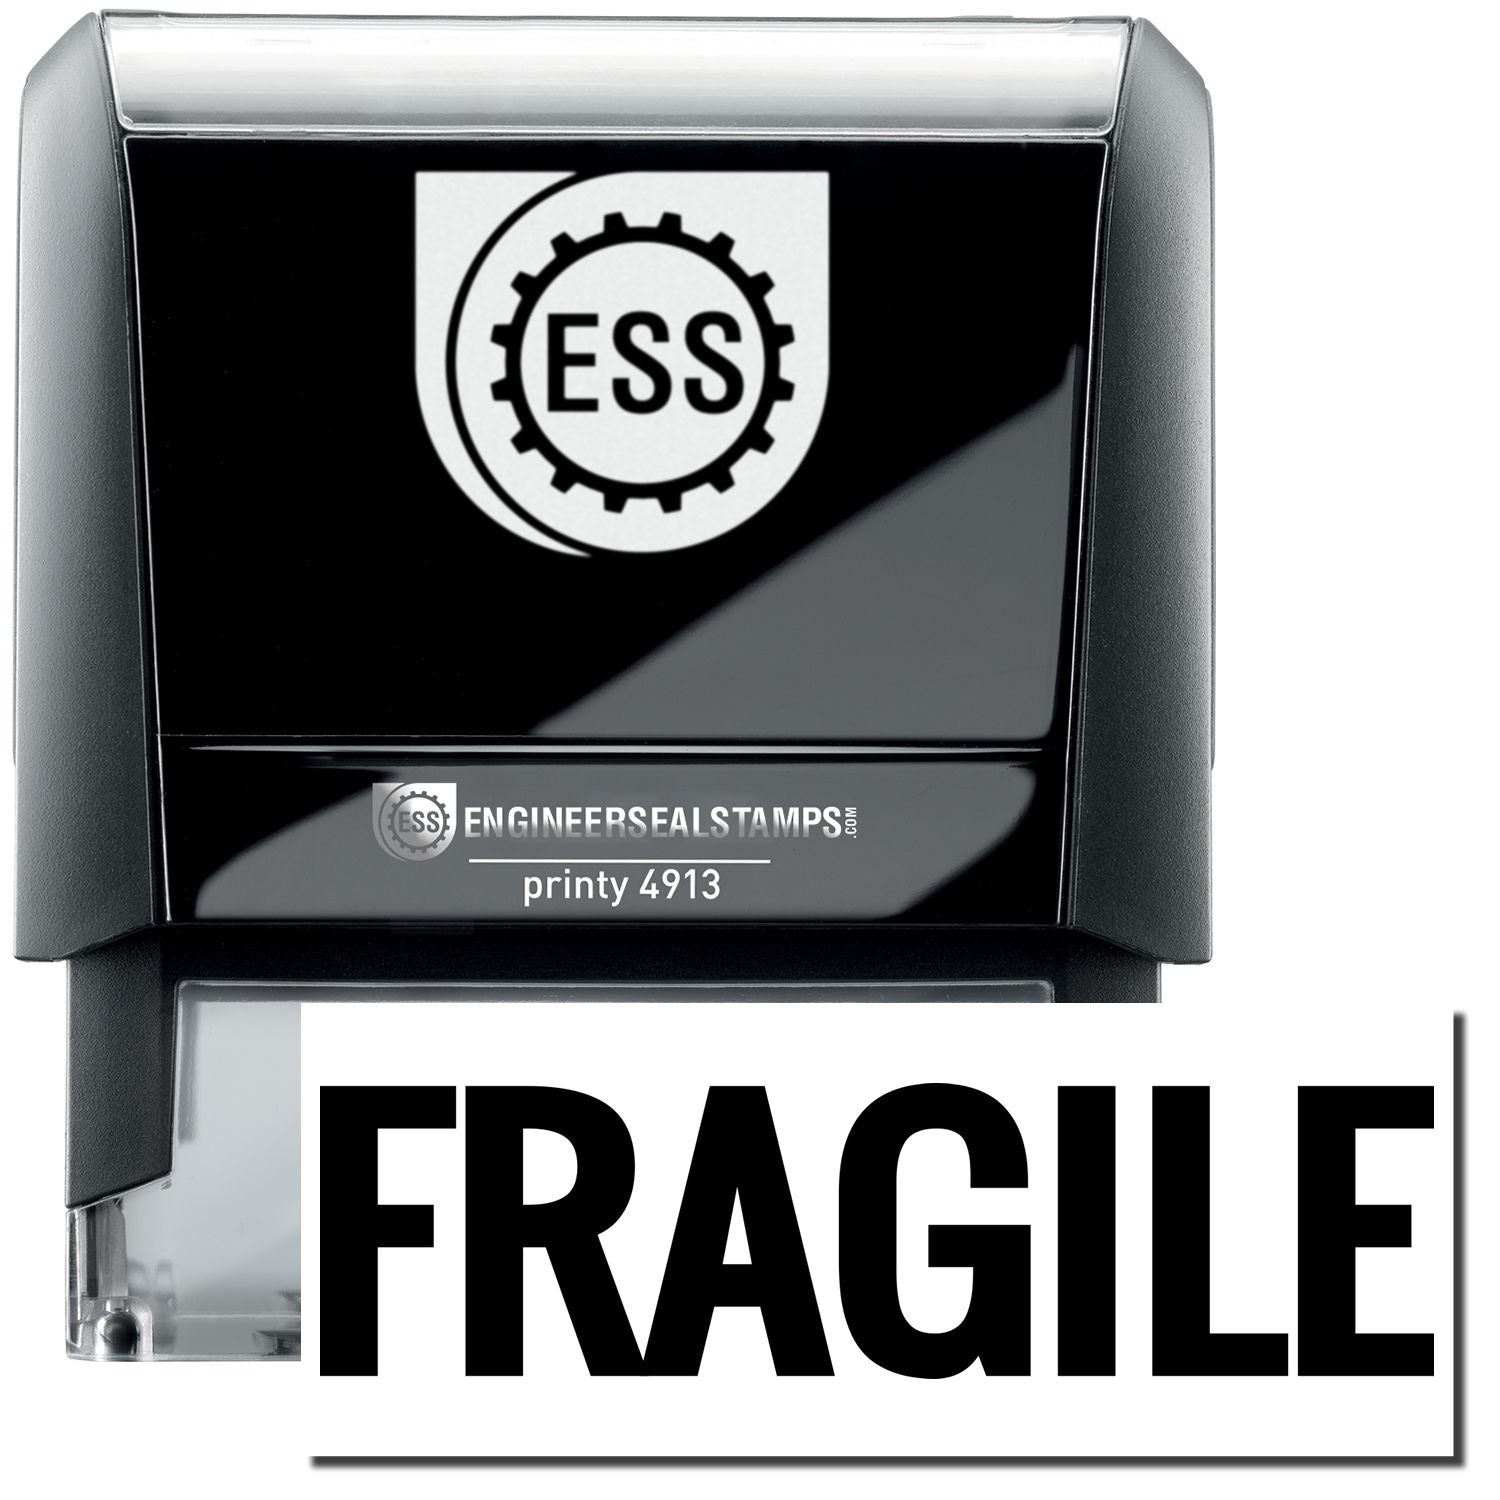 A self-inking stamp with a stamped image showing how the text "FRAGILE" in a large bold font is displayed after stamping.